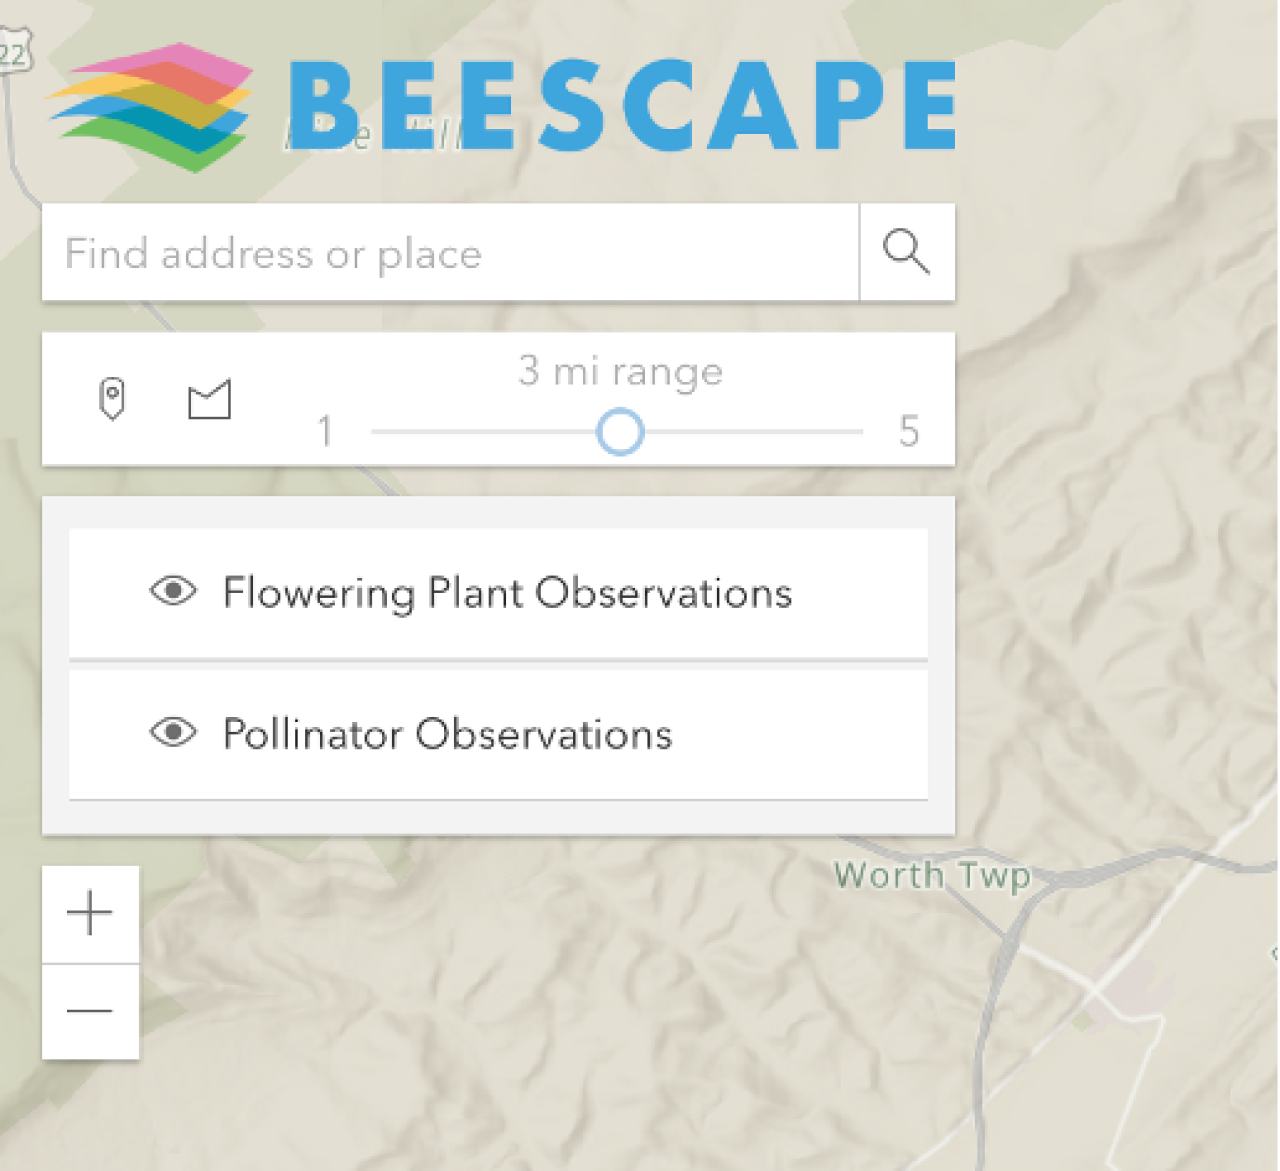 Screenshot of the Beescape location interface